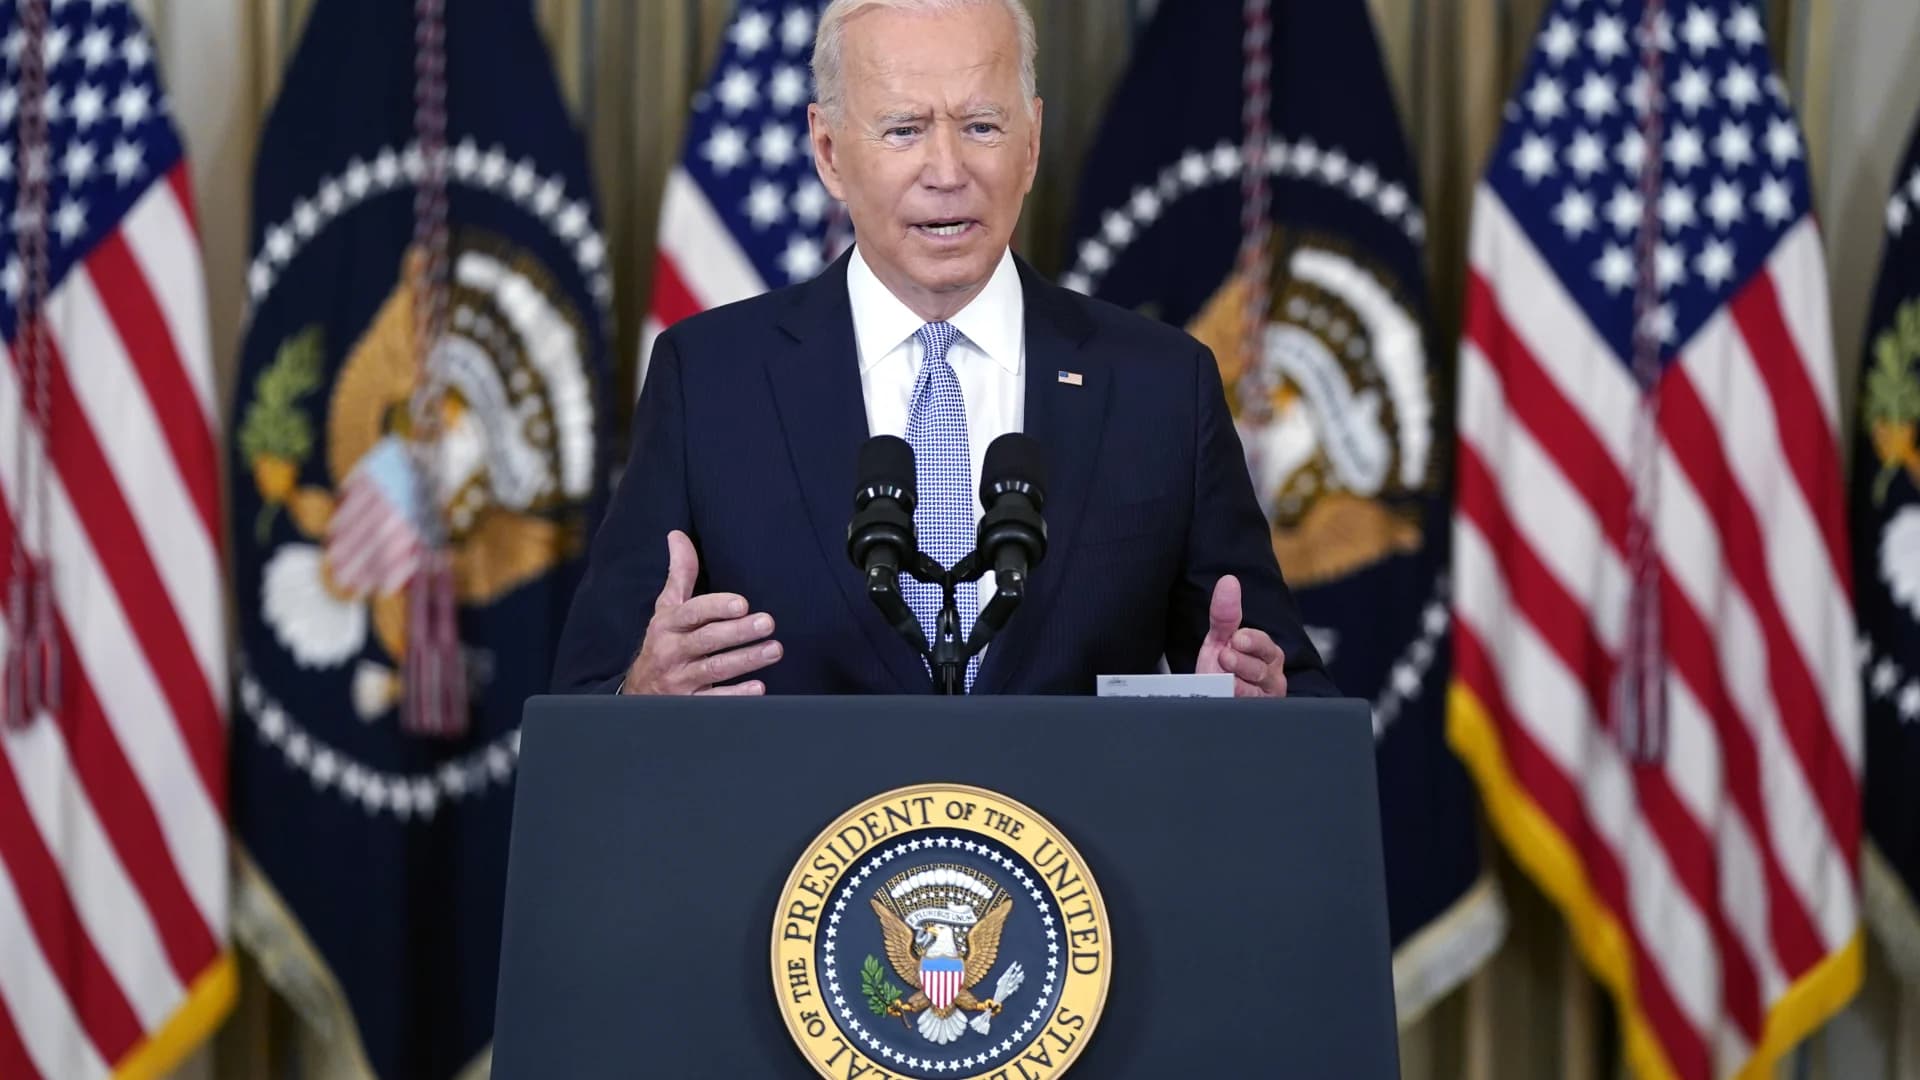 President Biden urges COVID-19 booster shots for those now eligible